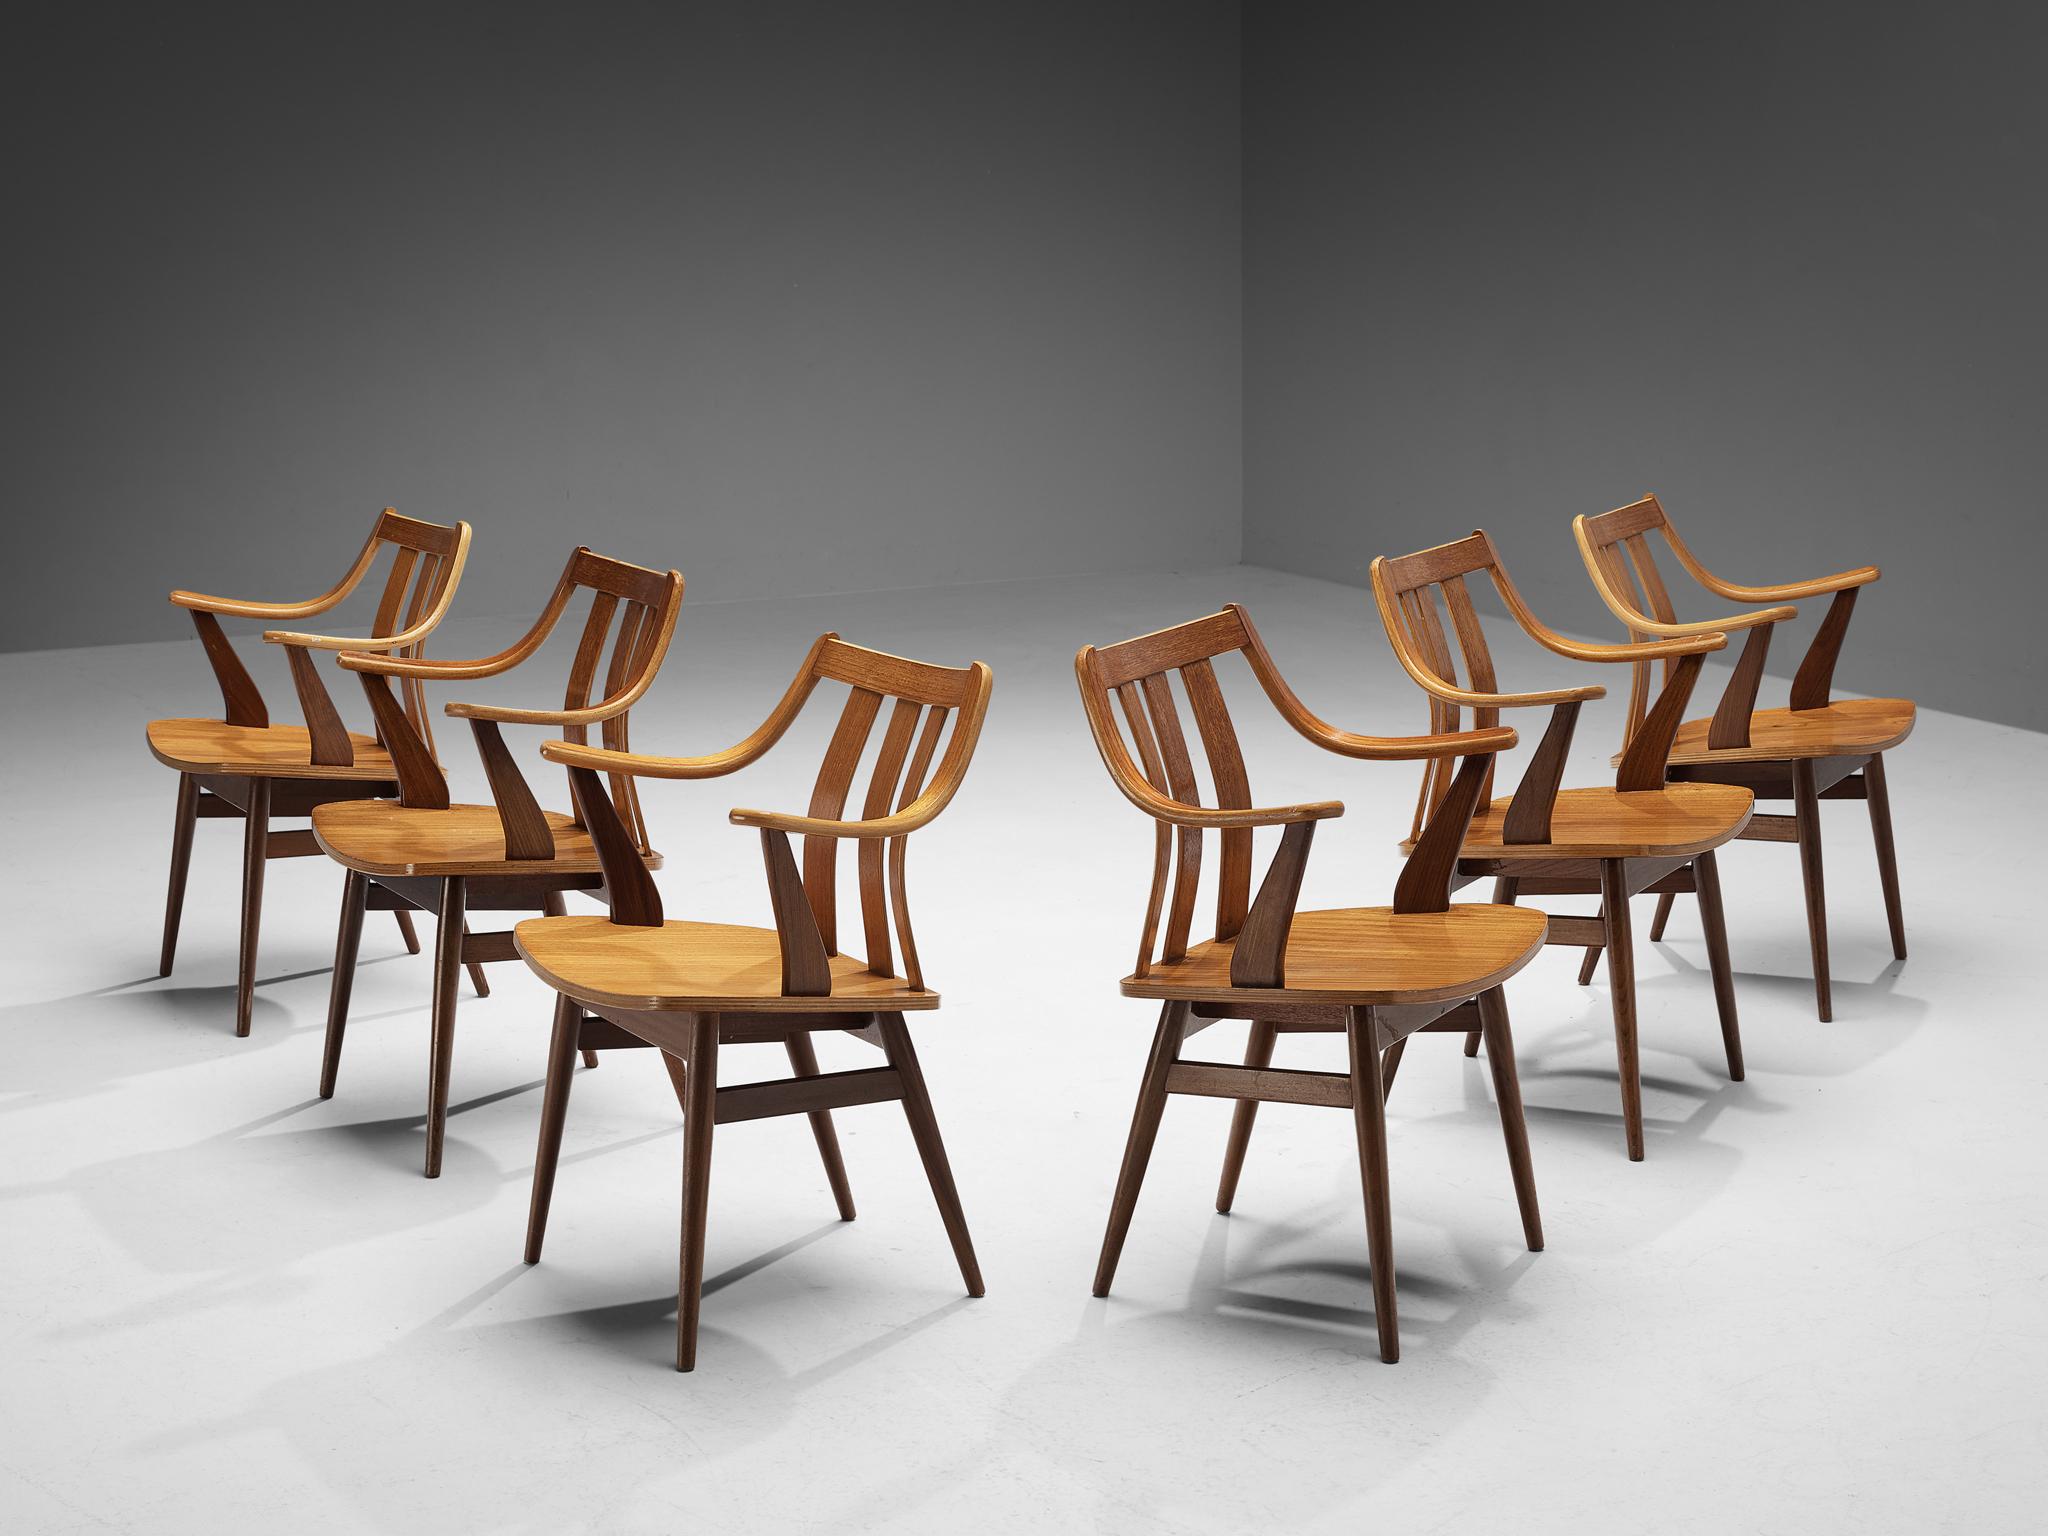 Dining chairs, plywood, Netherlands, 1960s

A set of innovative and durable chairs: these strongly curved dining chairs crafted from plywood. These chairs, a testament to both form and function, feature a distinctive silhouette characterized by